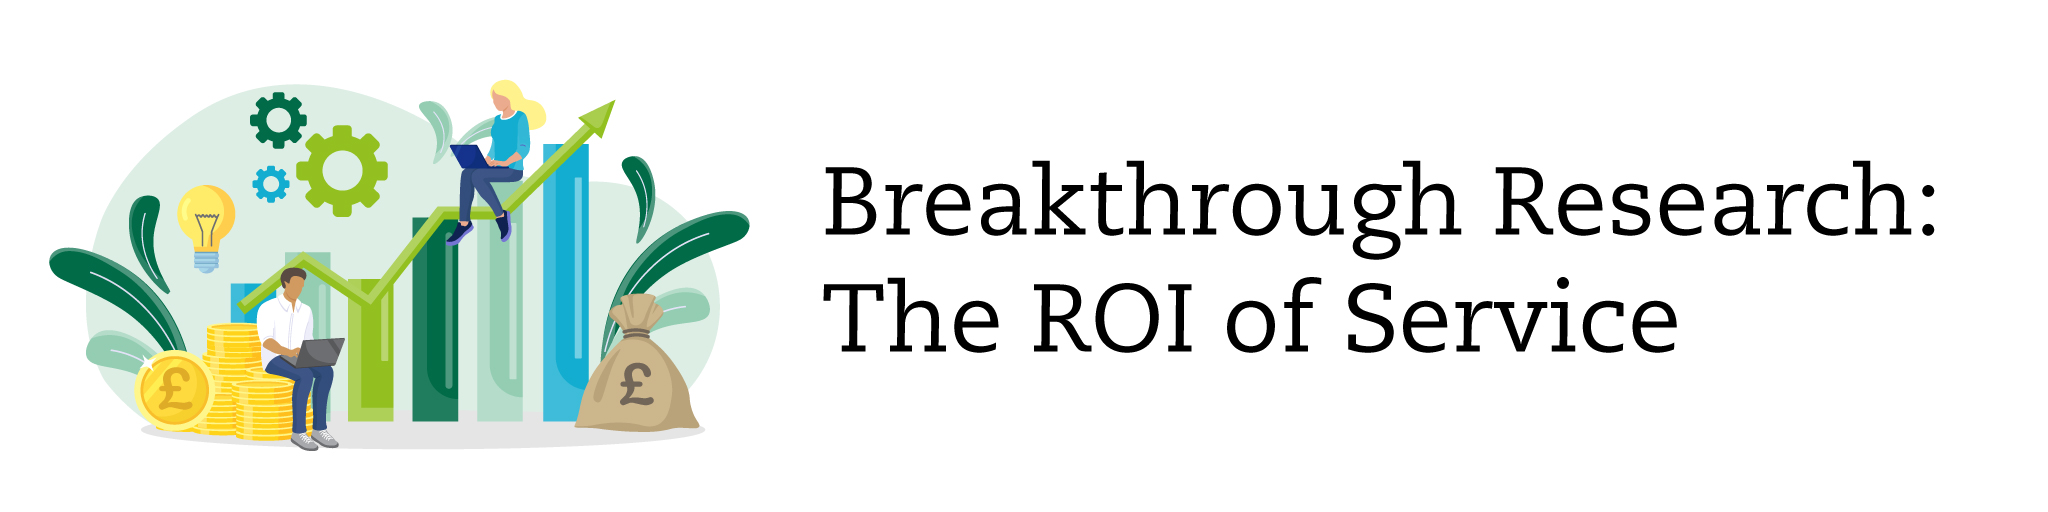 The ROI of Service Website Banner